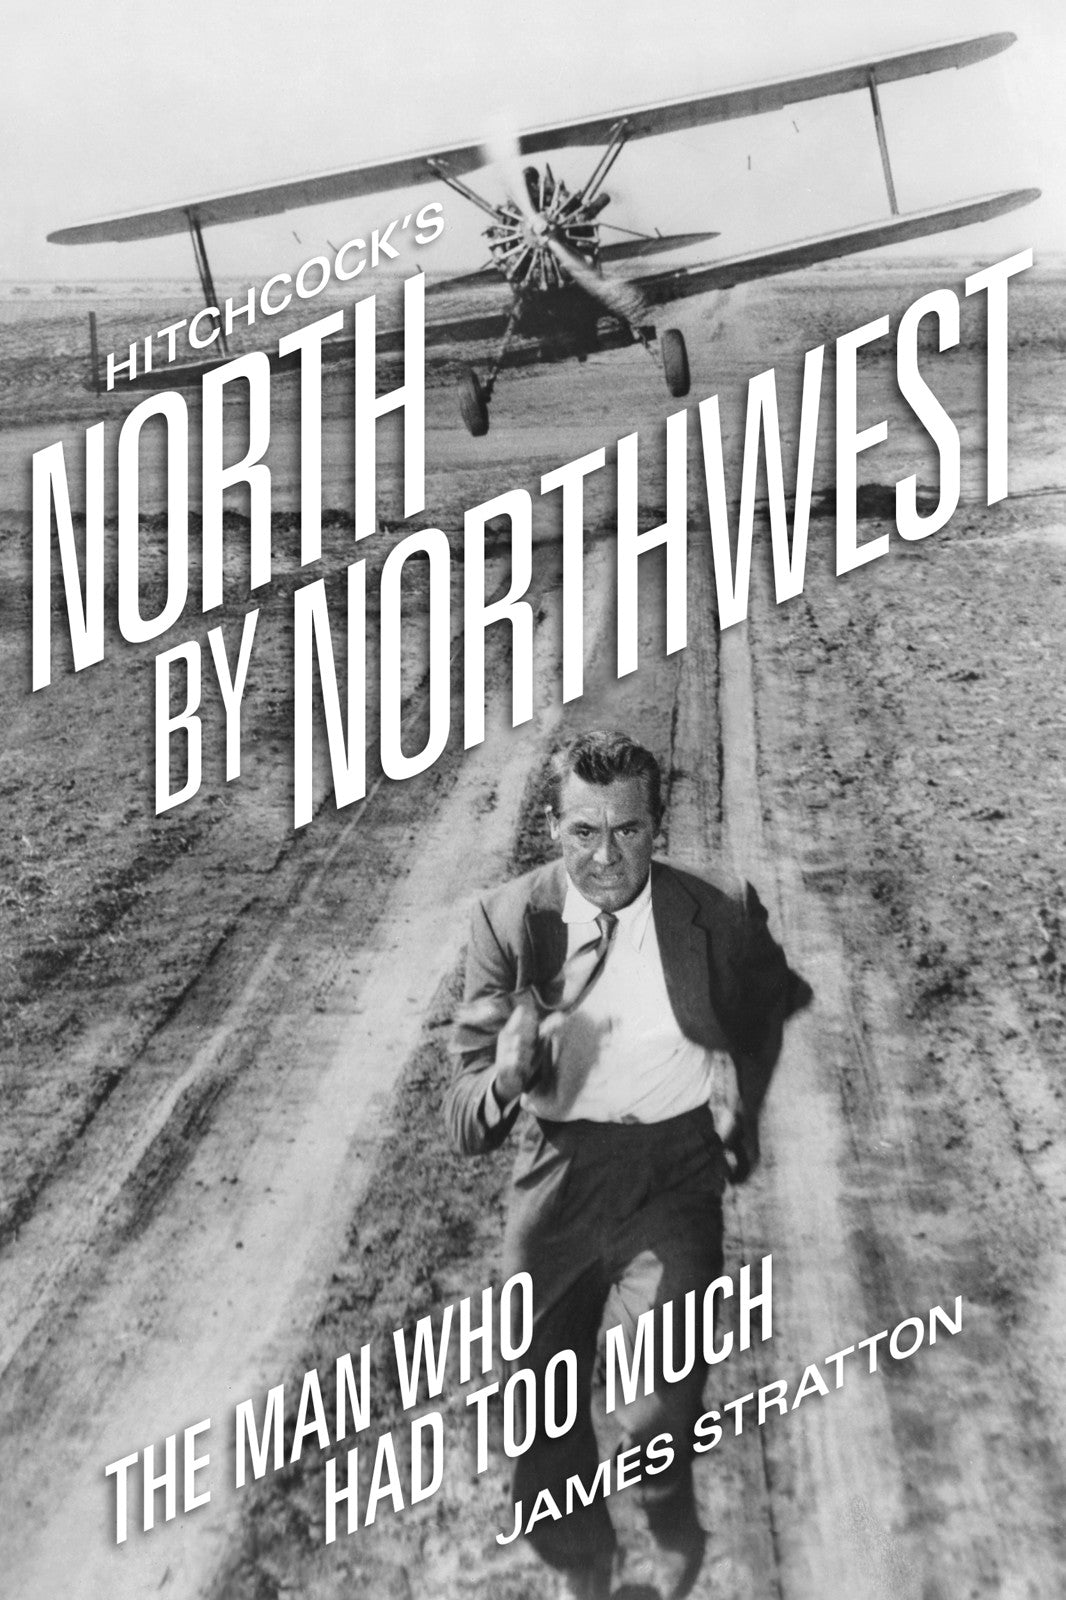 HITCHCOCK'S NORTH BY NORTHWEST: THE MAN WHO HAD TOO MUCH (paperback)